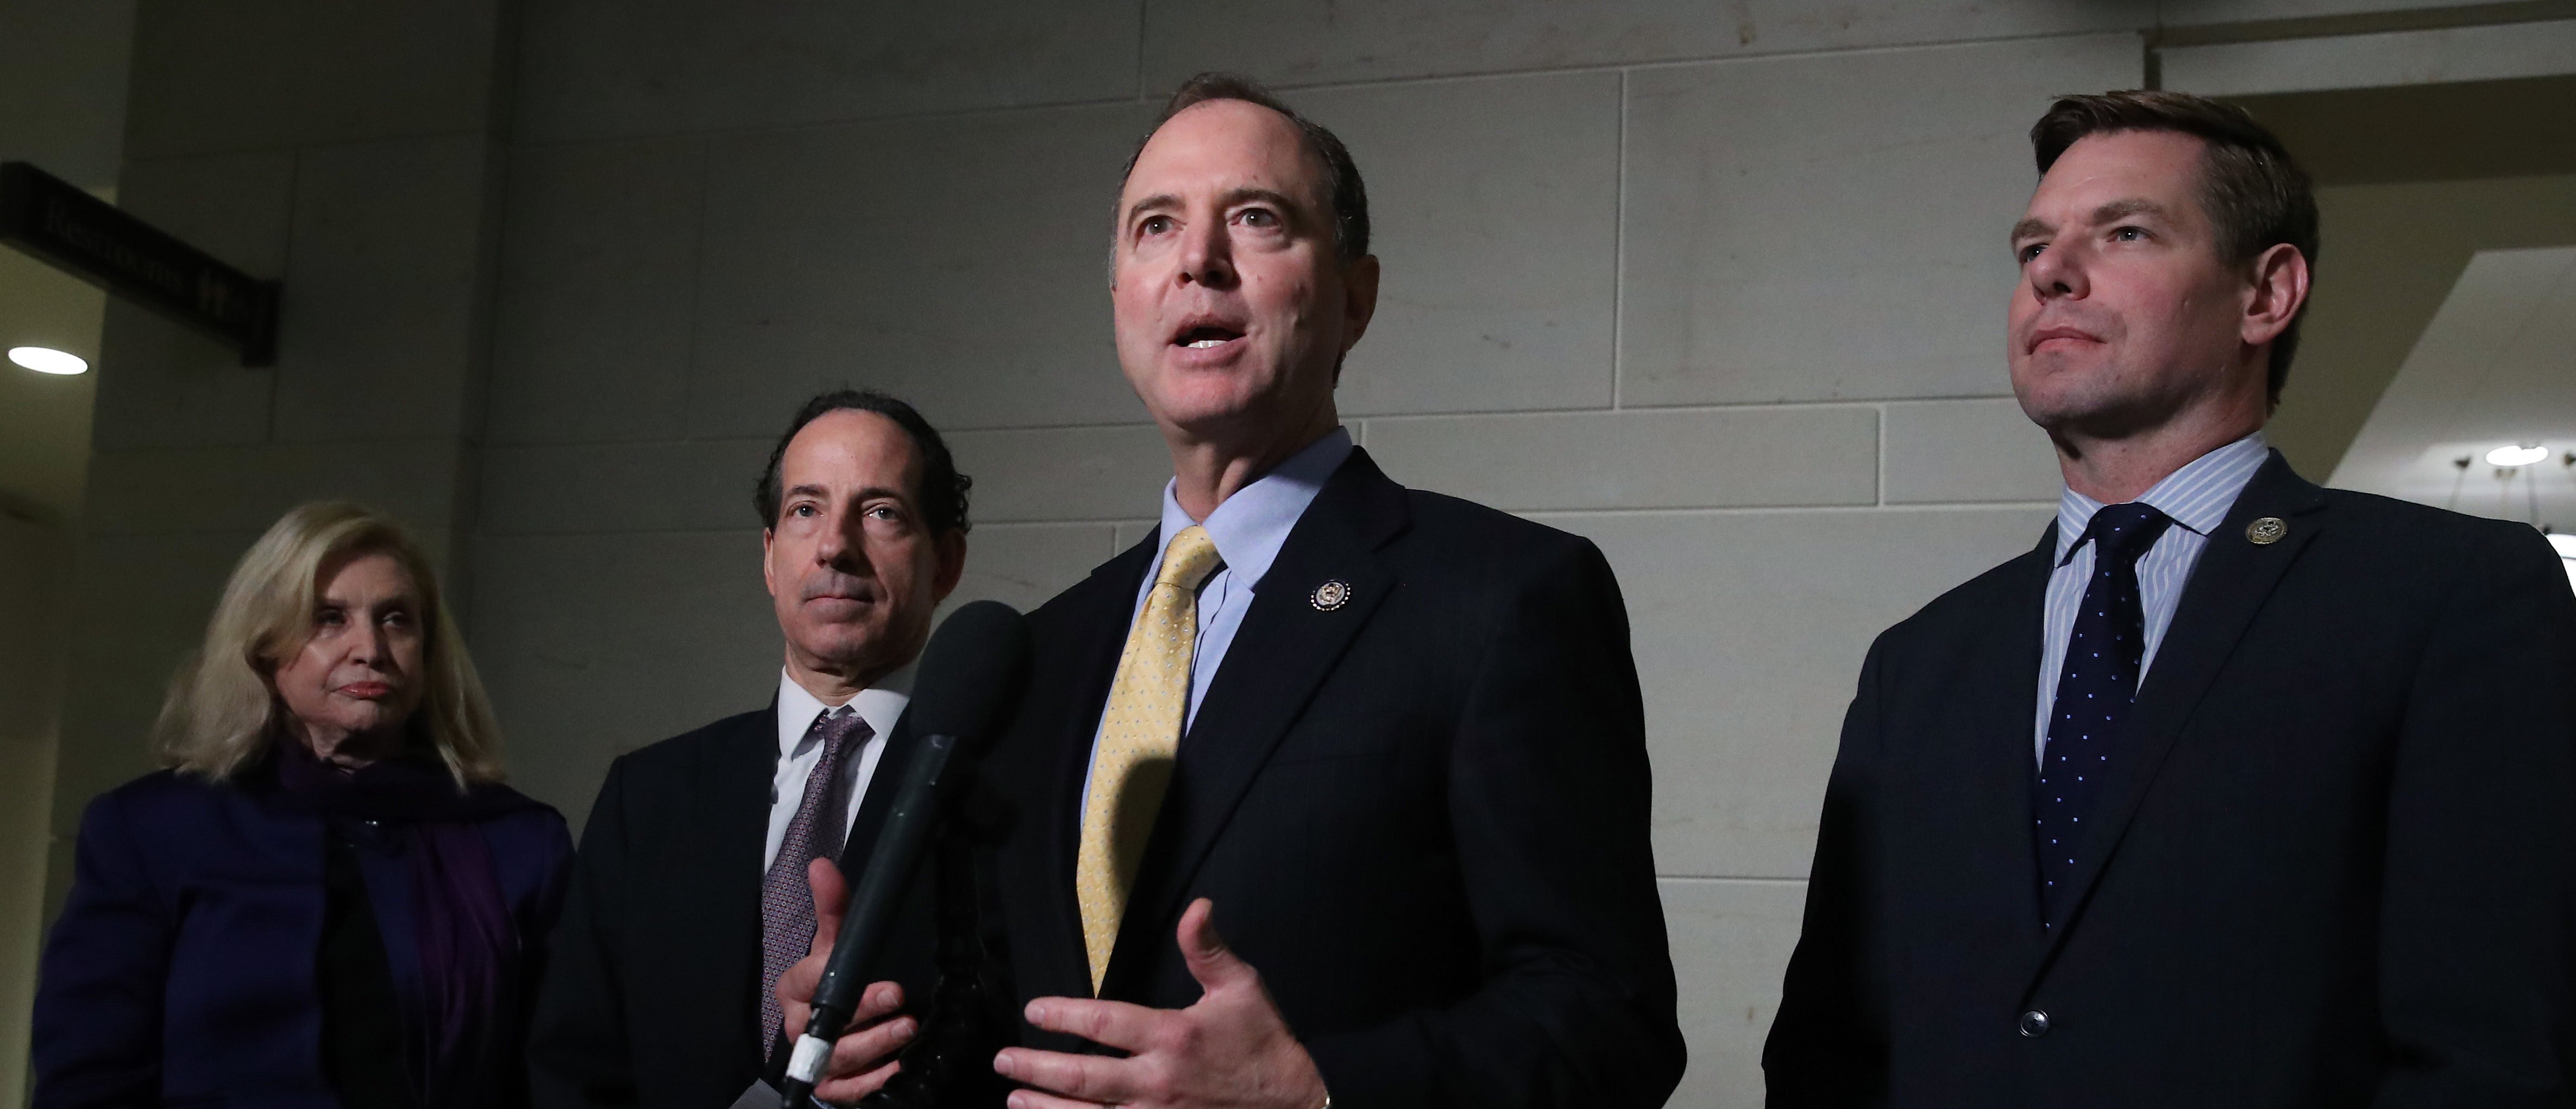 U.S. House Intelligence Committee Chairman Rep. Adam Schiff (D-CA) speaks to members of the media outside a closed session before the House Intelligence, Foreign Affairs and Oversight committees at the U.S. Capitol on October 28, 2019. (Mark Wilson/Getty Images)